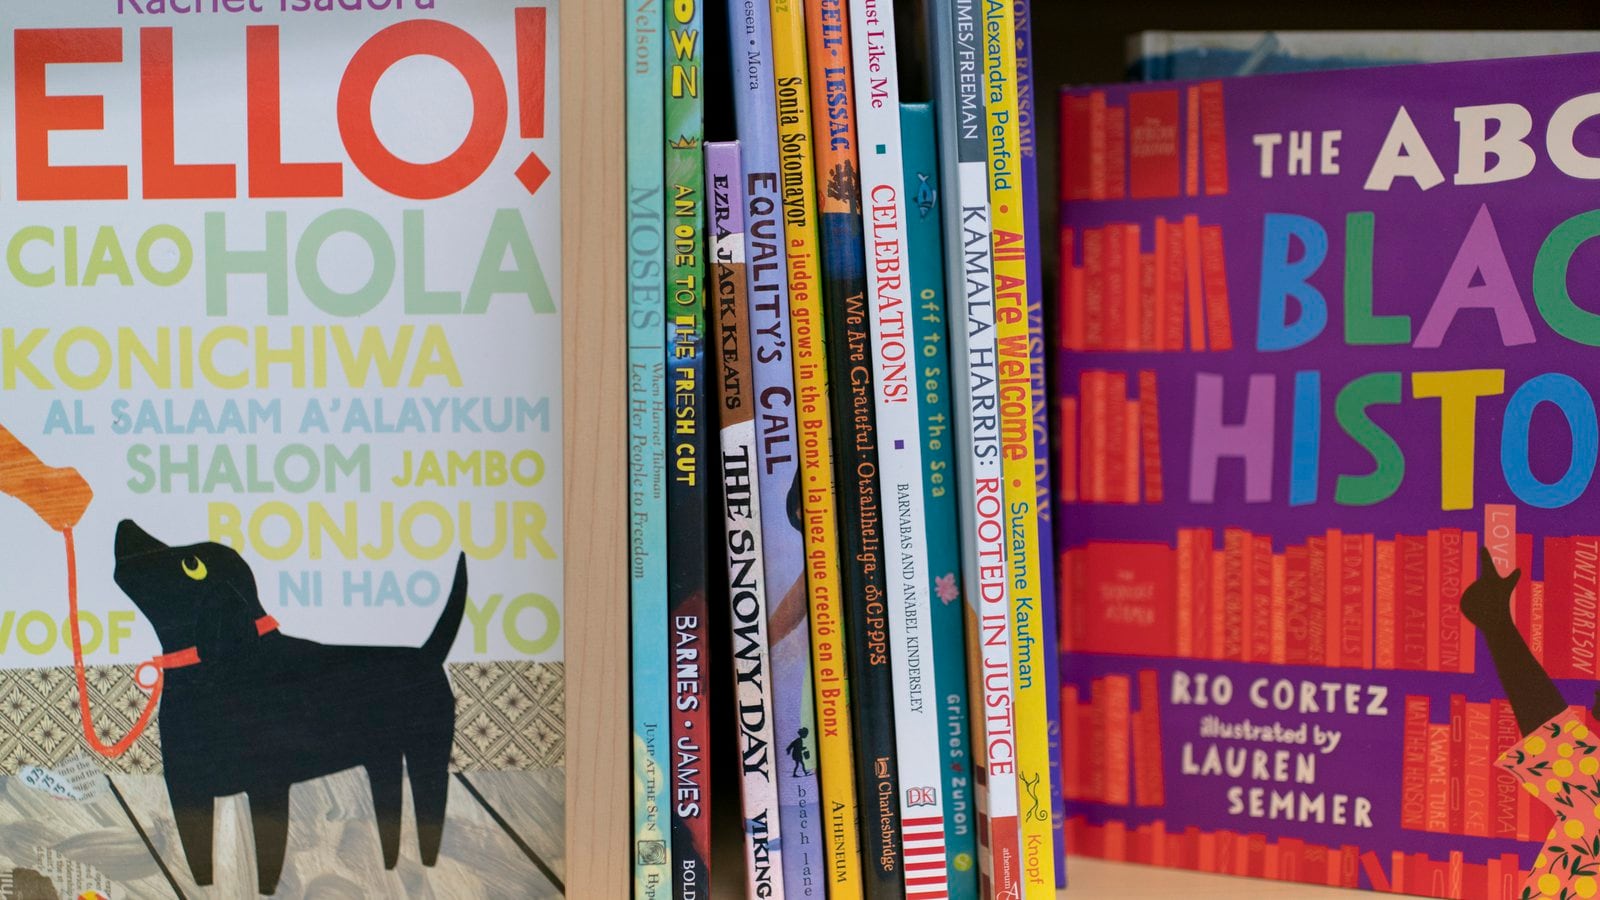 A display of colorful picture books, including some about Black history.